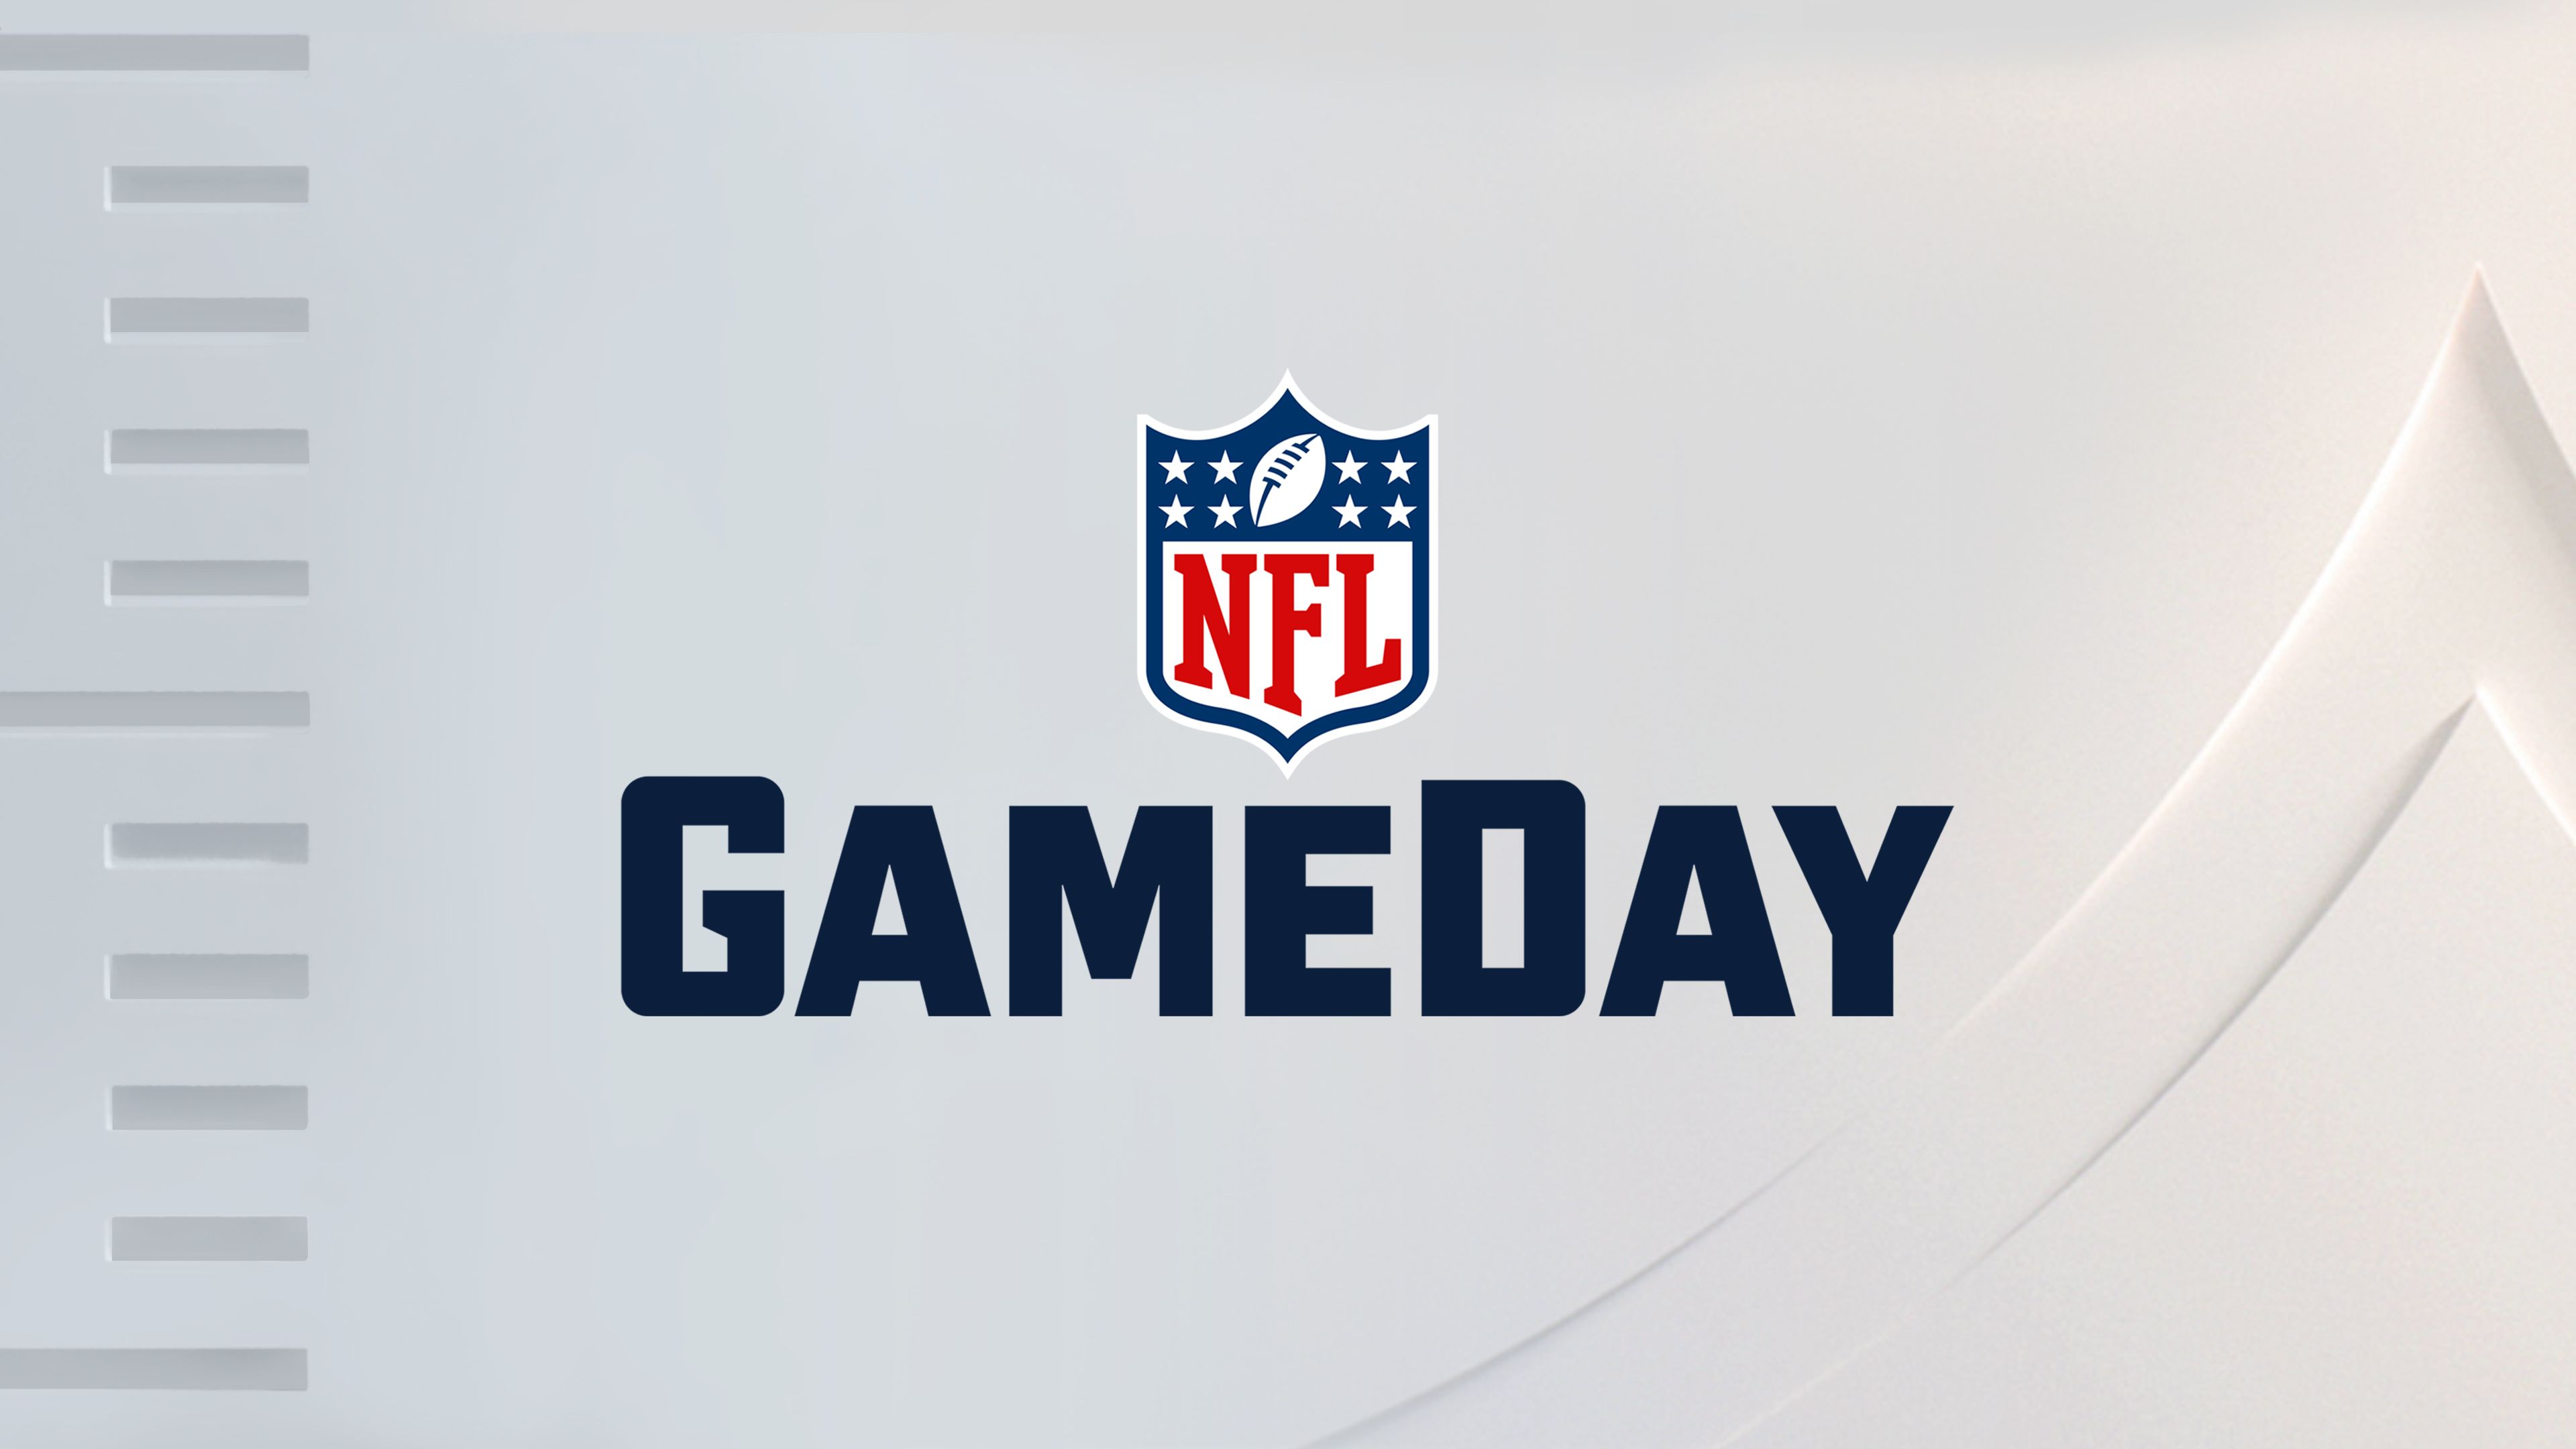 NFL Network Live Football, Shows, Events